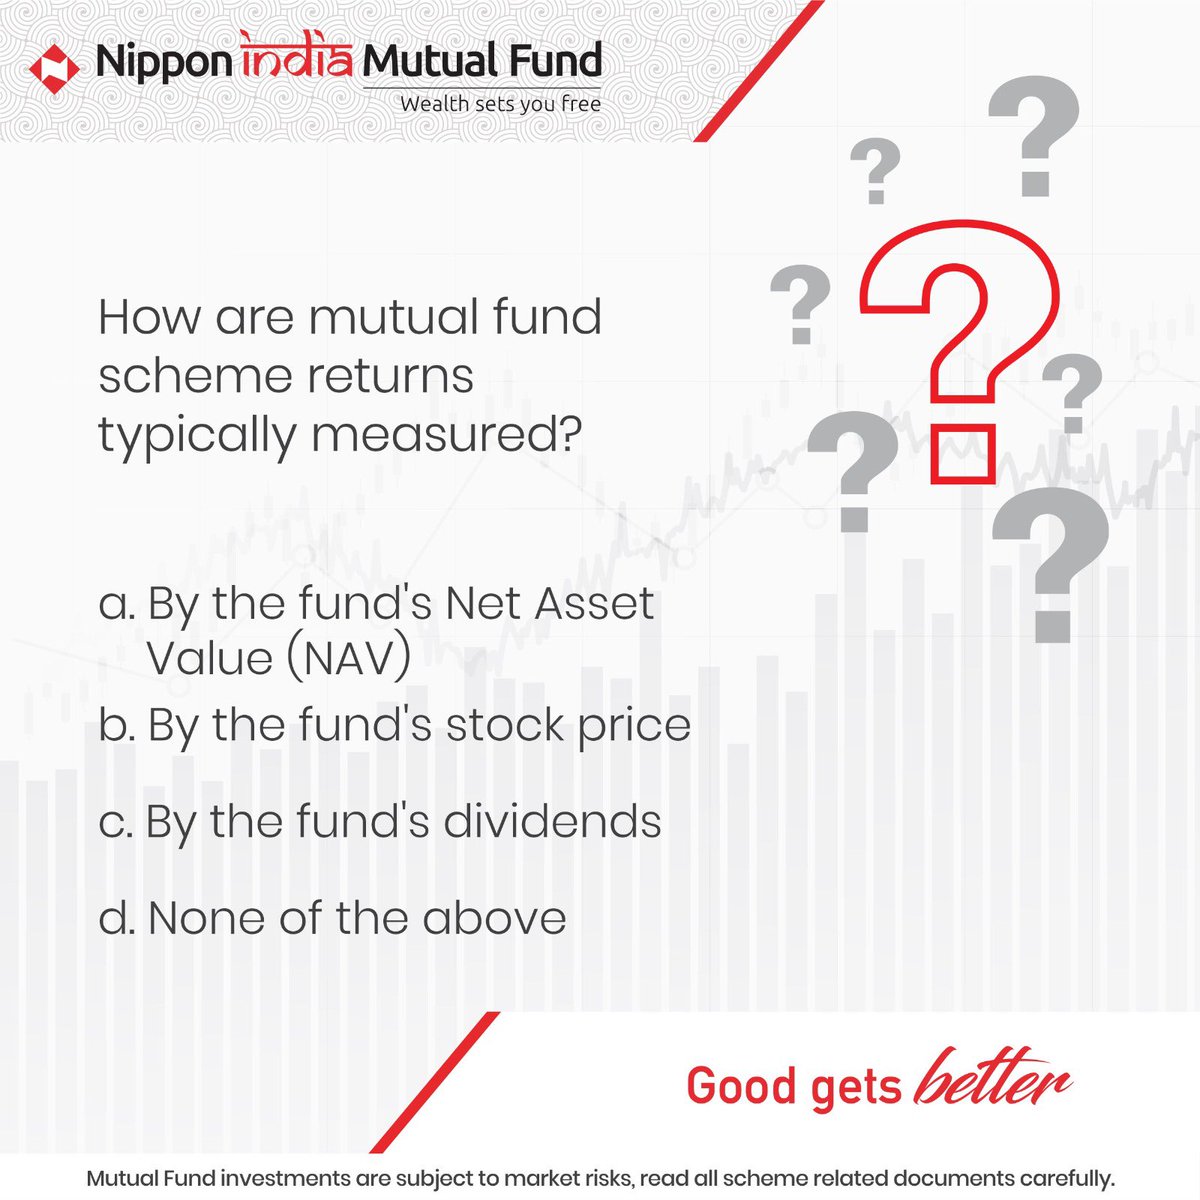 #TheNipponQuiz is here!

Comment below the correct answer and tag @nipponindiamf with 3 friends to win special prizes!

#Contest #ContestAlert #NipponIndiaMutualFund #MutualFund #Investment #Savings #FinancialGoals